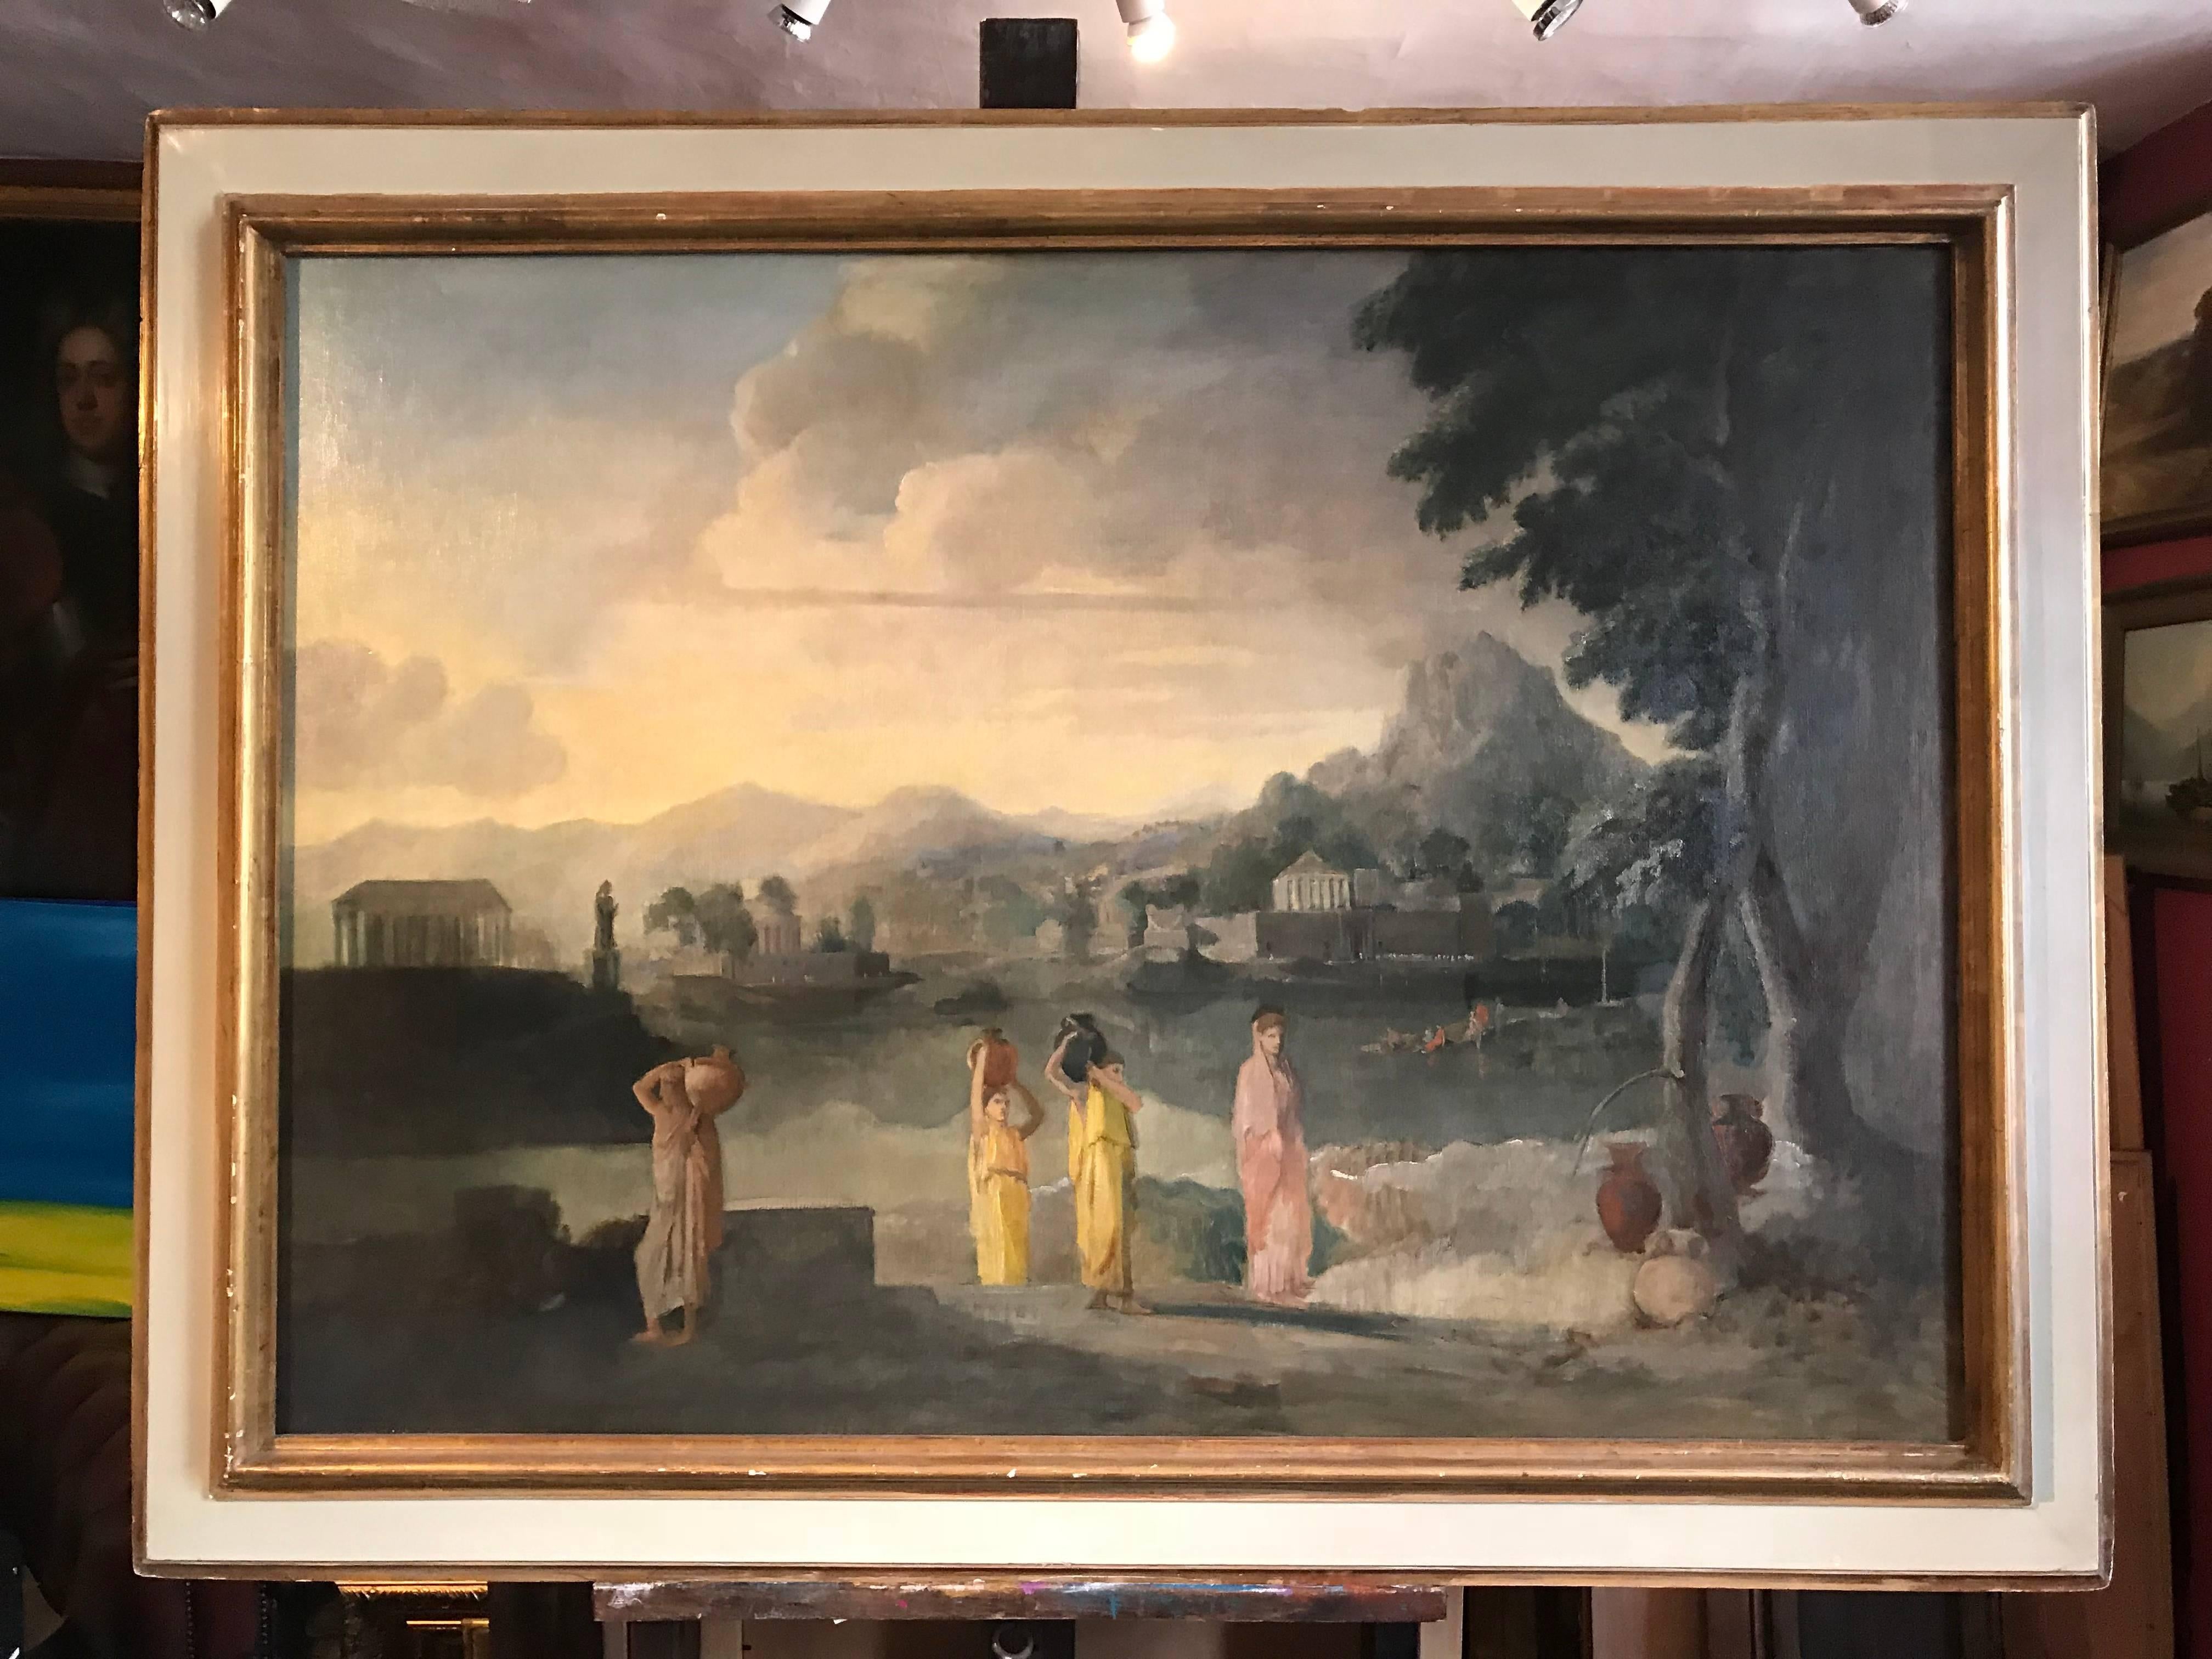 Gathering Water
Italian School, early 20th century
oil painting on canvas laid on board
framed: 42 x 56.5 inches

Superb quality oil painting dating to the early 1900's period. The work is considered to be of Italian authorship and depicts figures